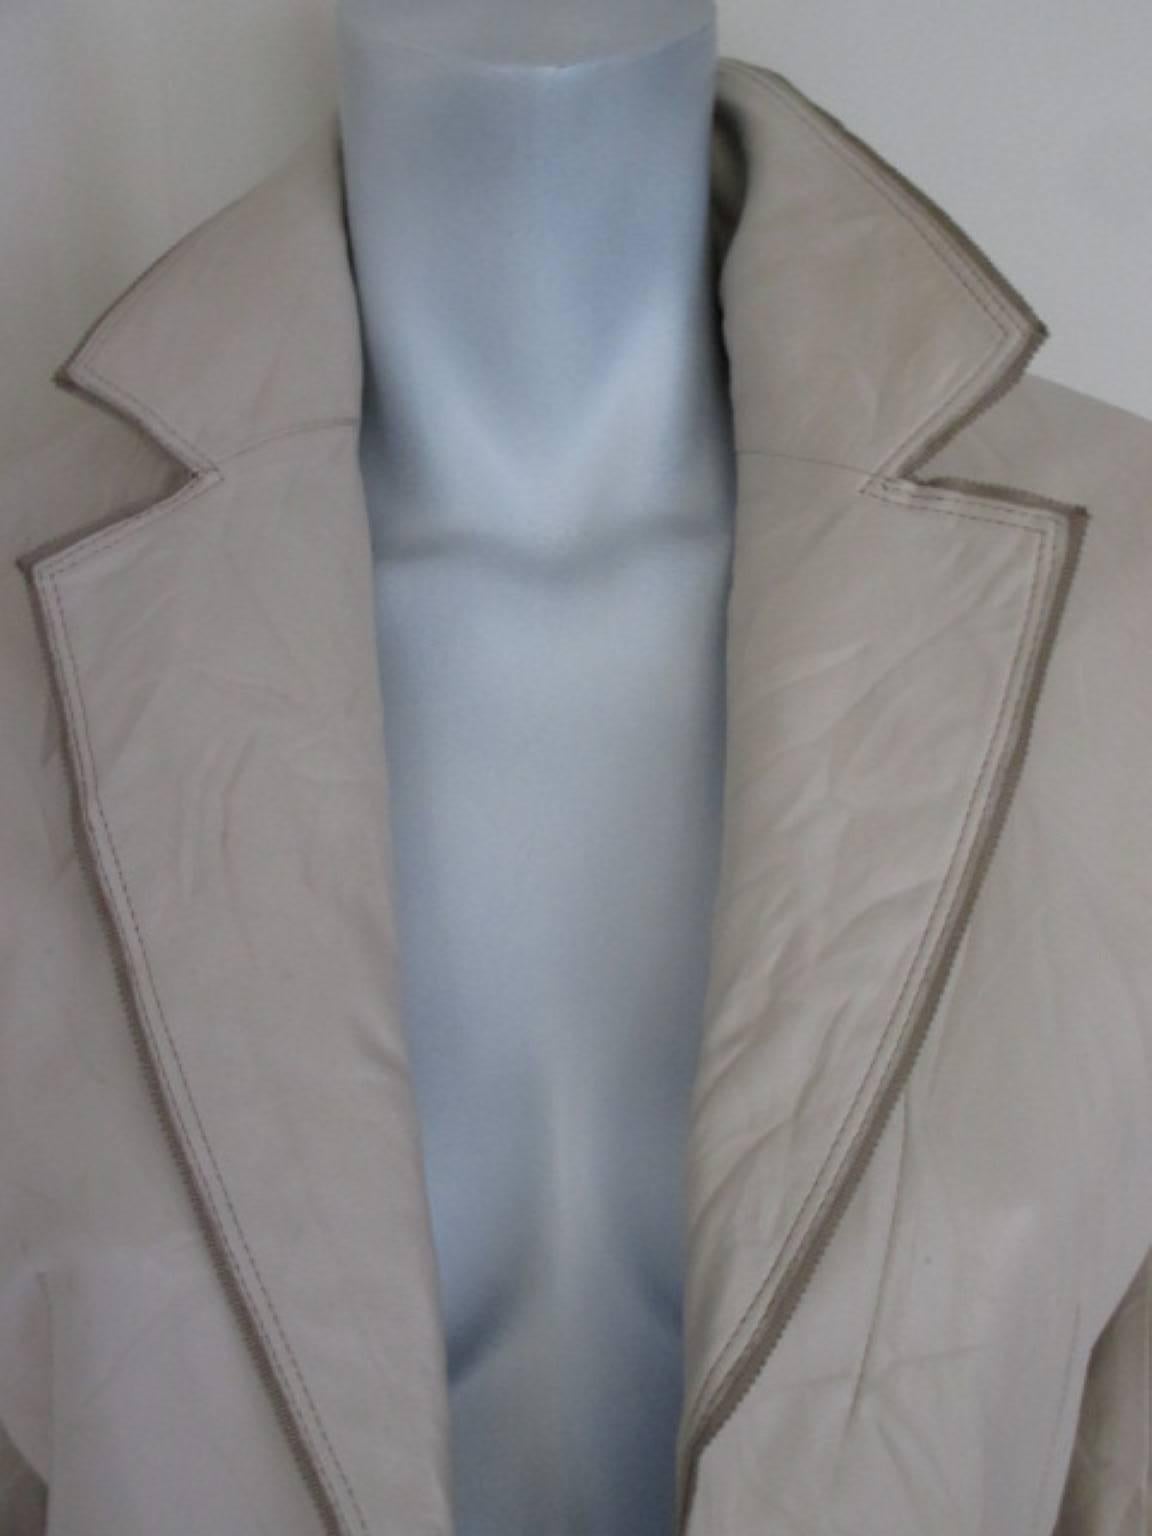 This coat is made of wrinkled soft leather with 2 pockets and 2 buttons.
Color is crème/off white
Its in fair condition with some wear and at right sleeve a little scratch.
Appears to be US 8/ EU38, please refer to the measurements in the